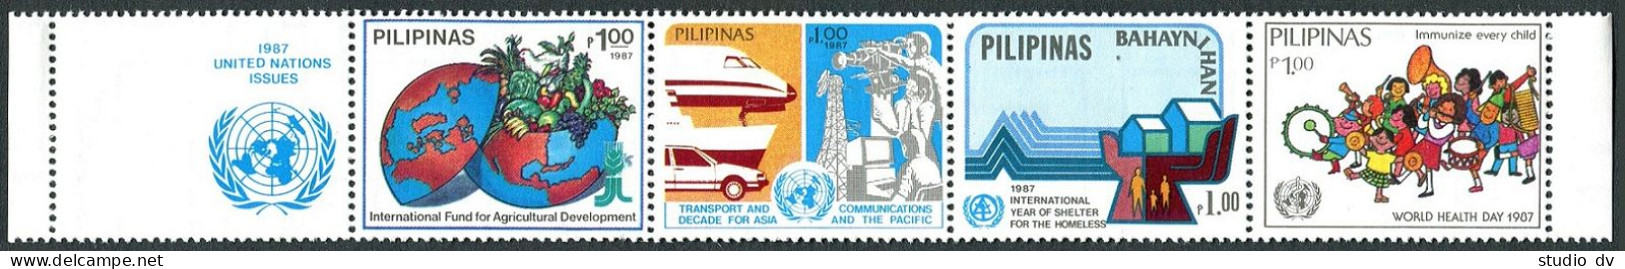 Philippines 1907 Ad Perf & Imperf  Strips, MNH. UN Projects 1987. FAO, IYSH-1987 - Philippines